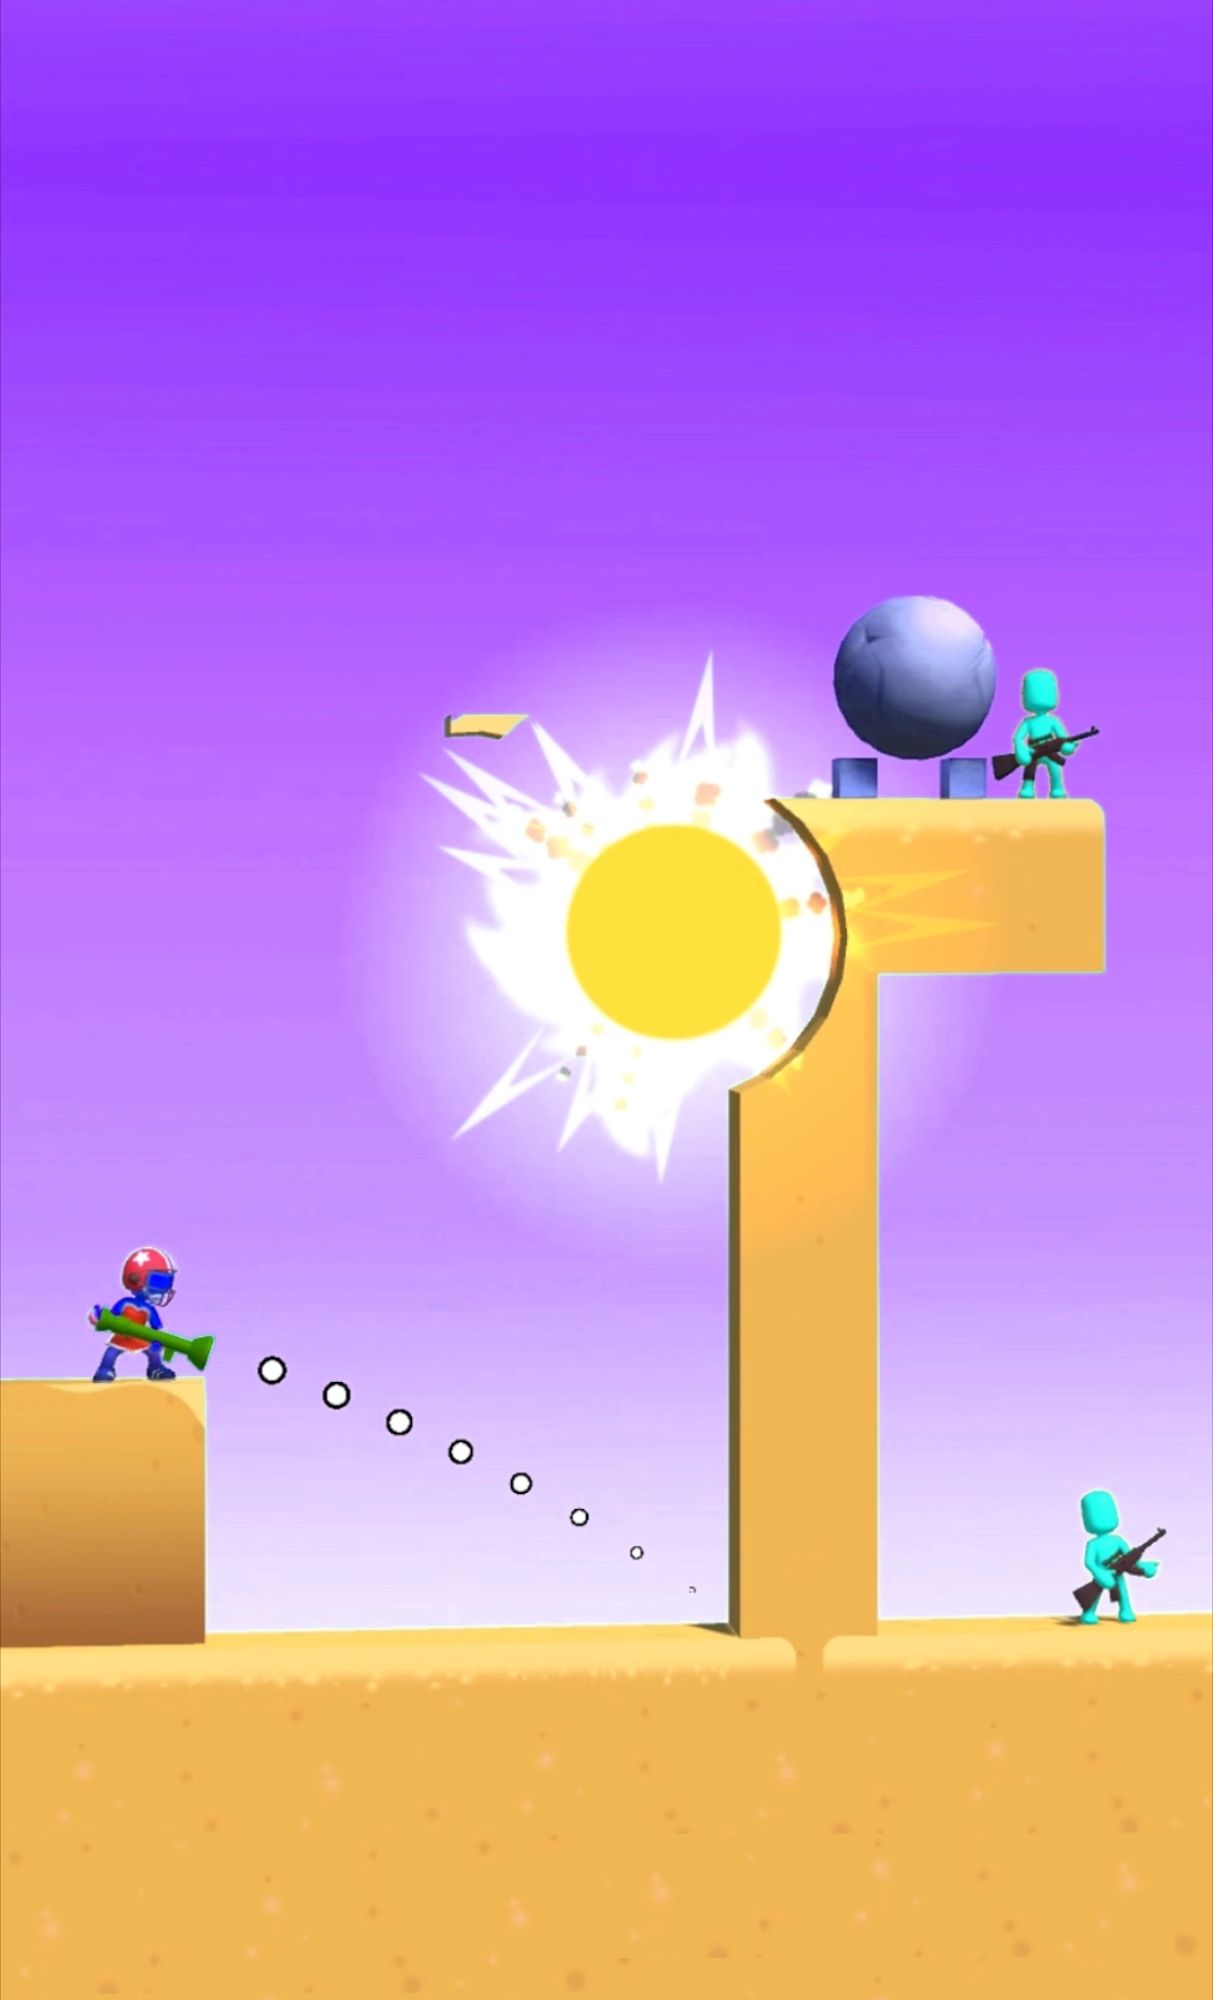 Gameplay of the Bazooka Boy for Android phone or tablet.